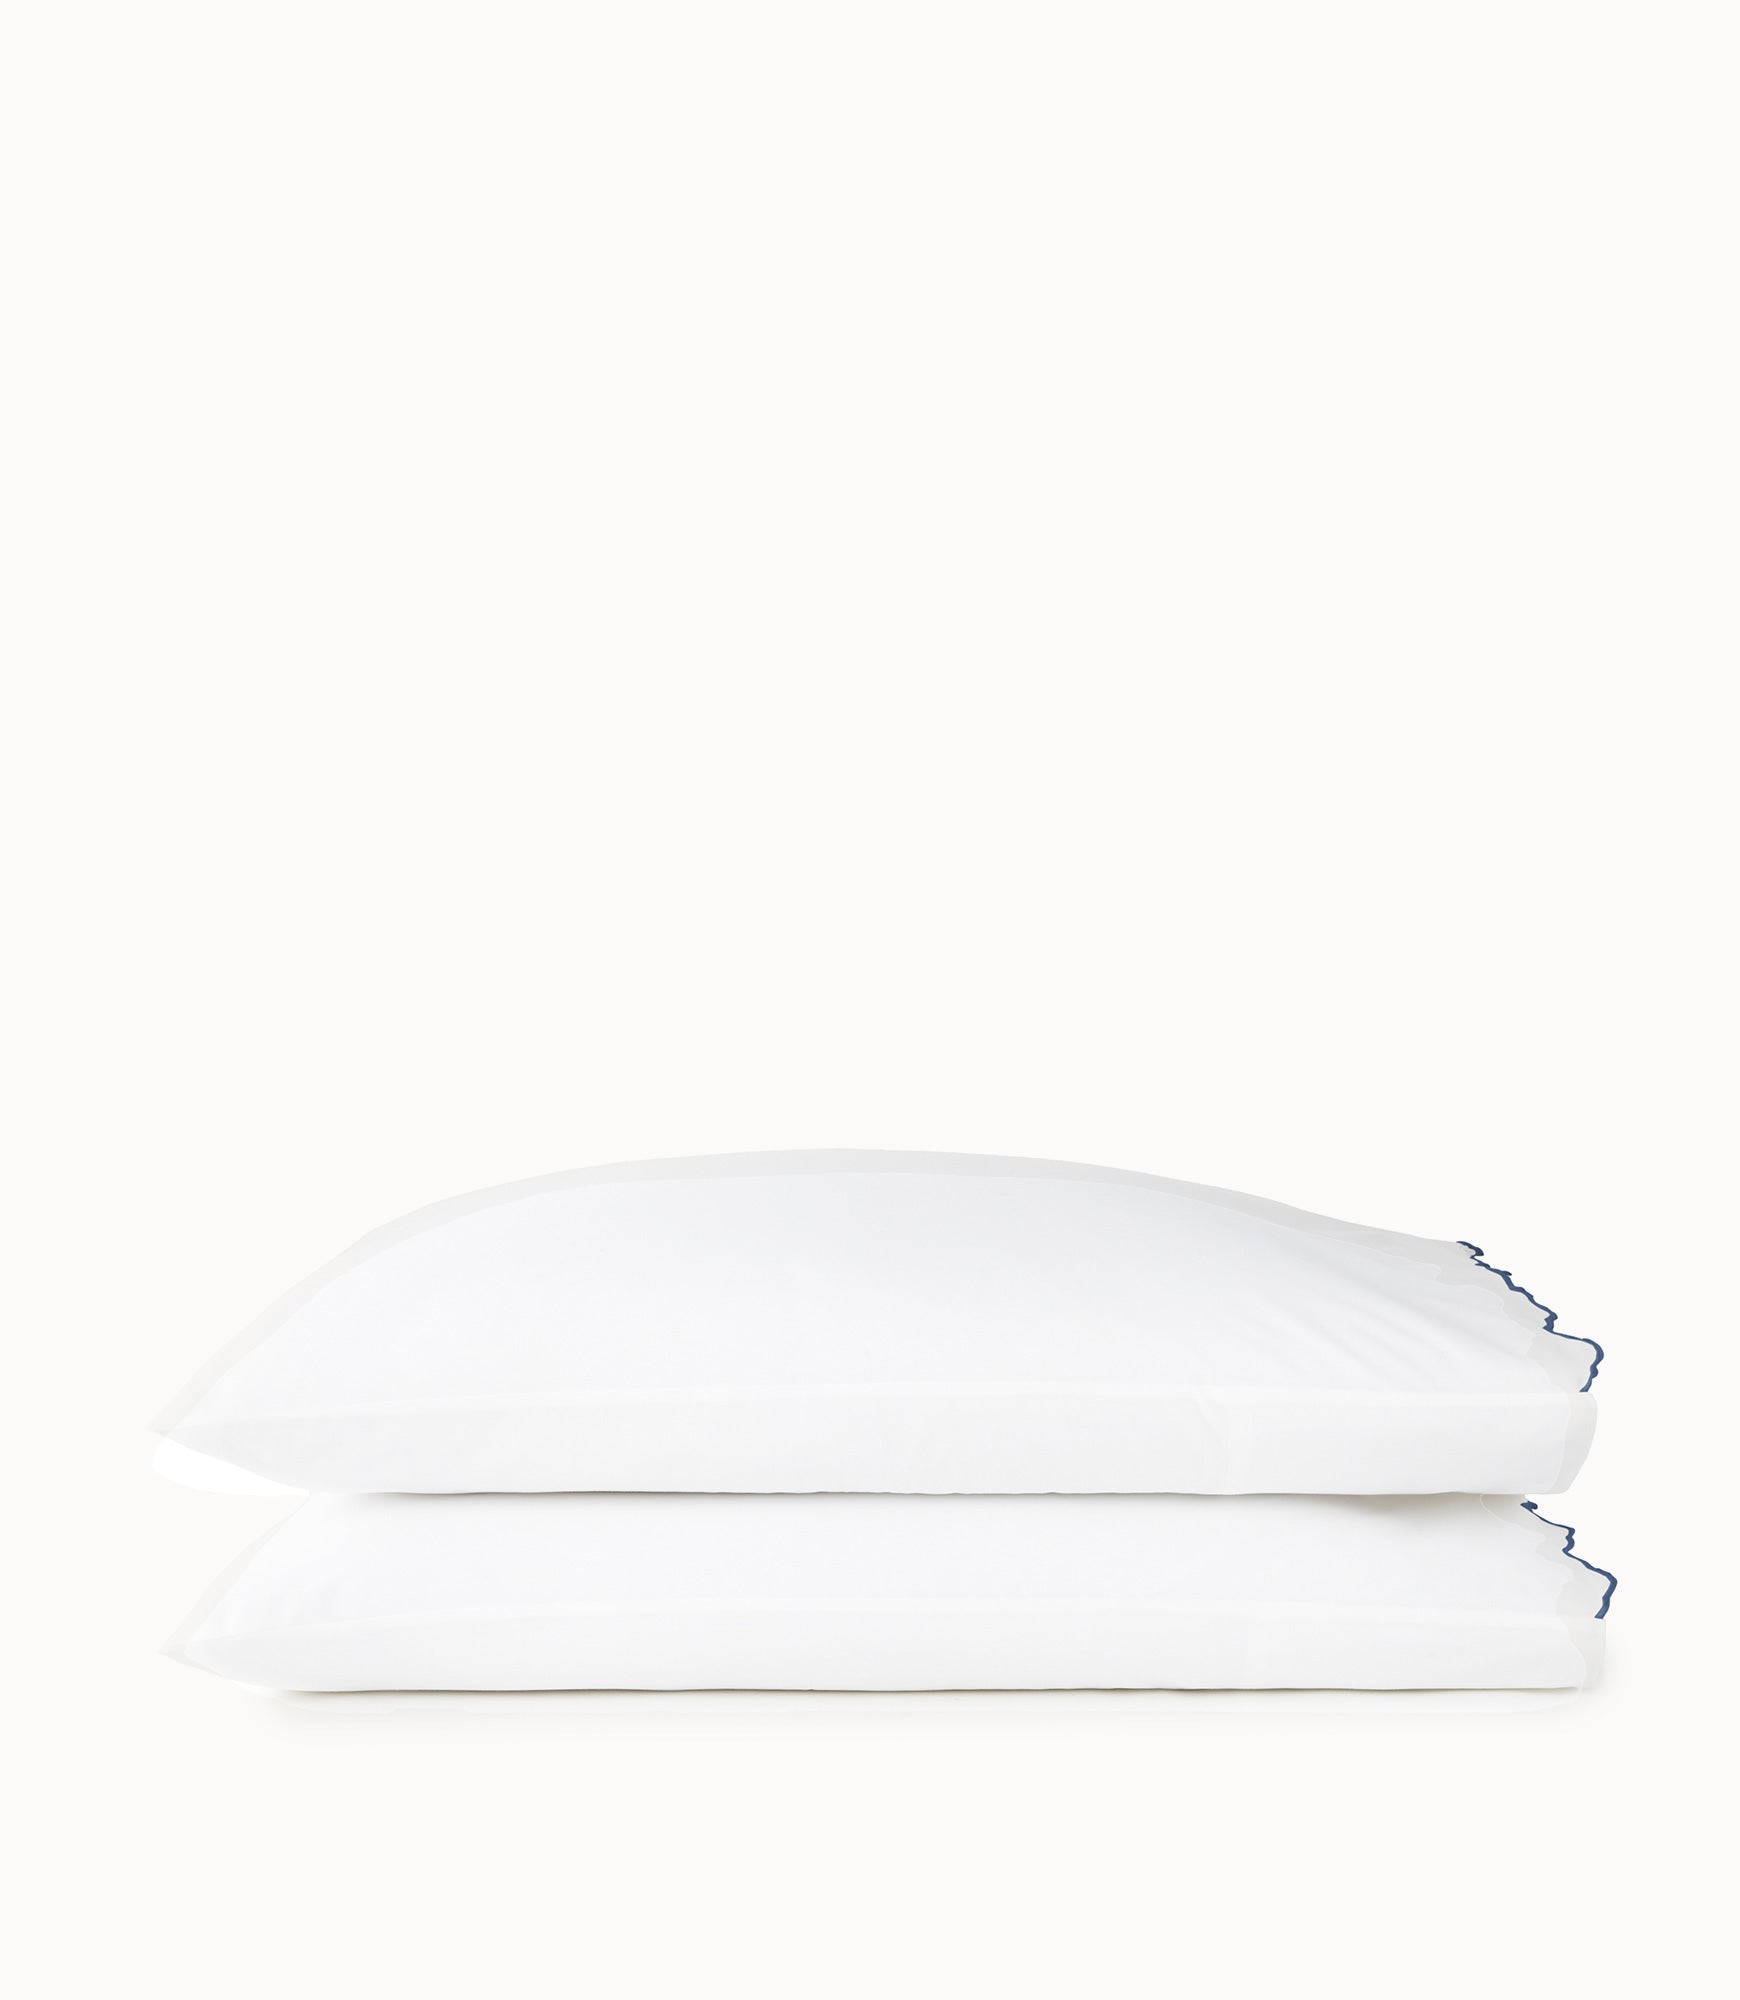 Urban Scallop Pillow Cases stacked Marine